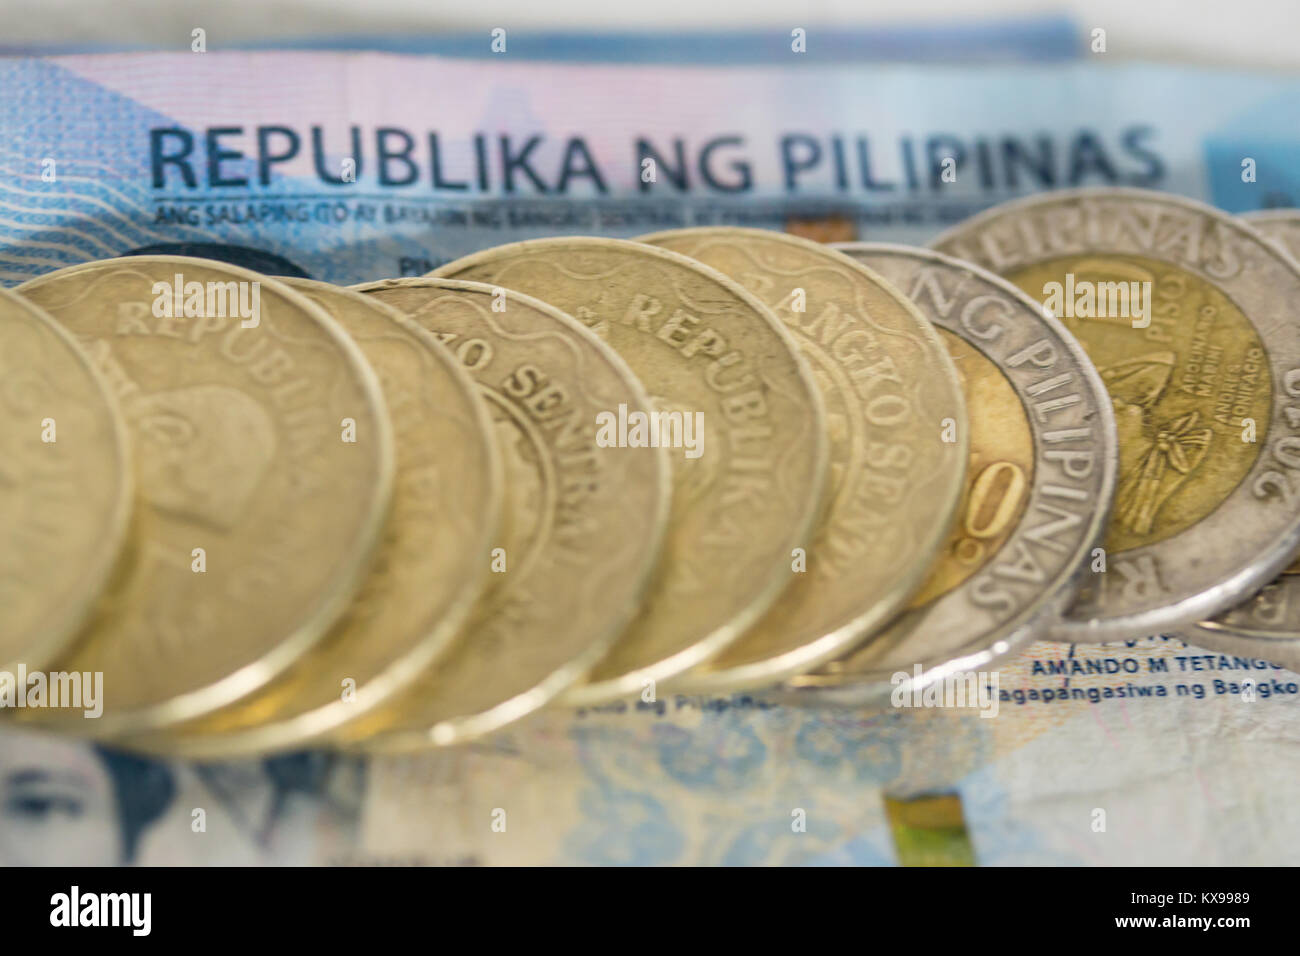 Concept image of Filipino coins and paper money indicating economy of the Philippines Stock Photo